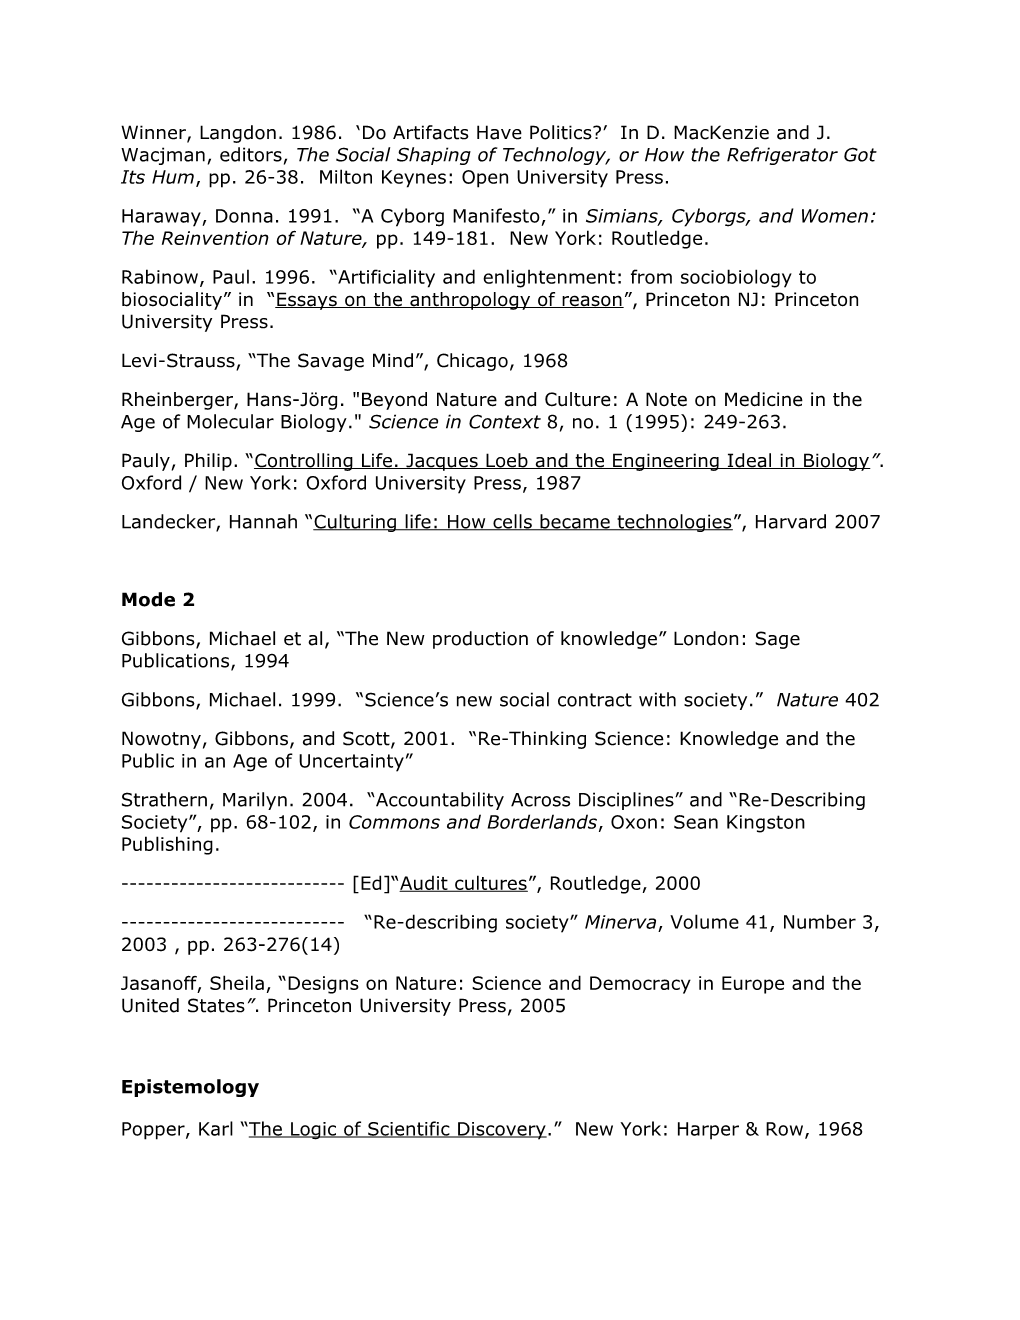 Bibliography for Anthropology of Science